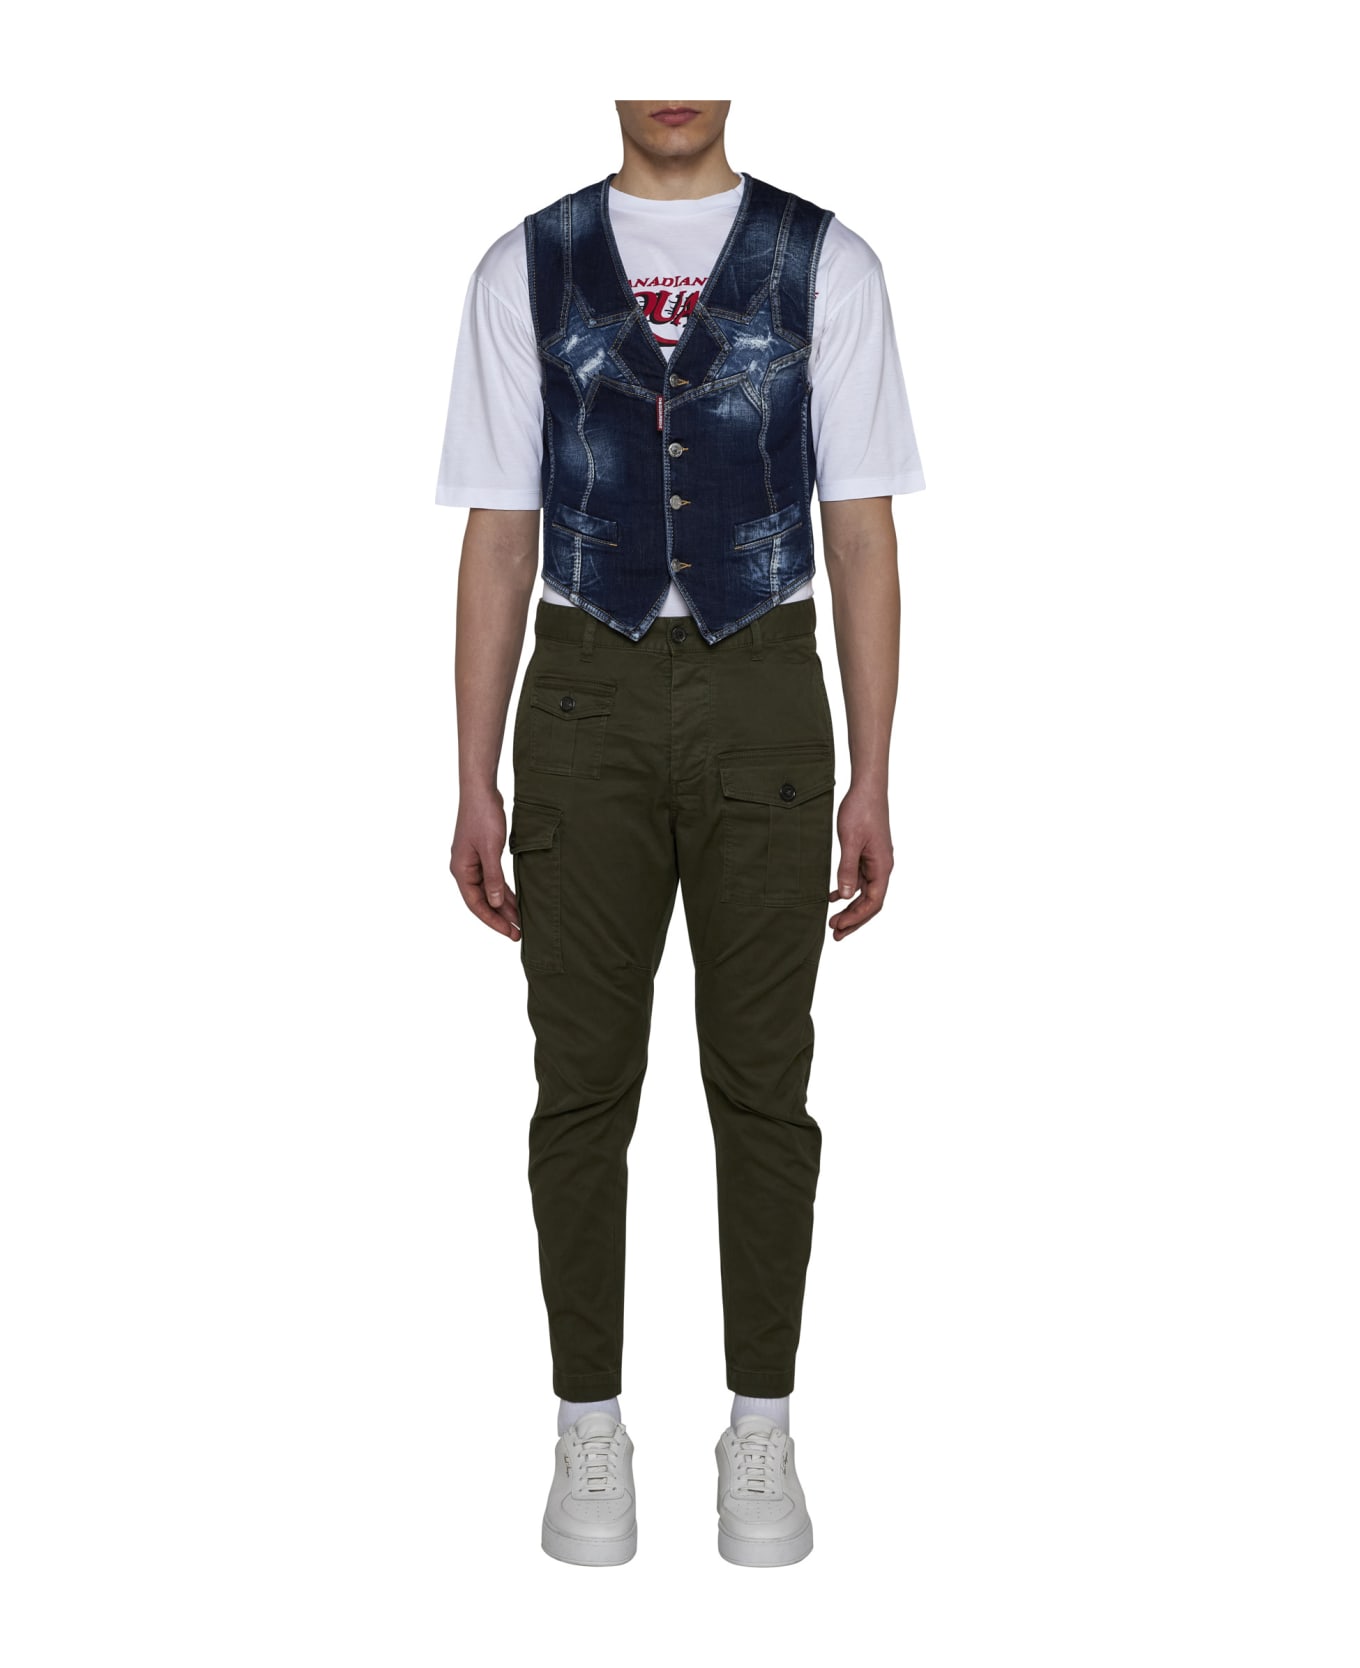 Dsquared2 Pants - Military green